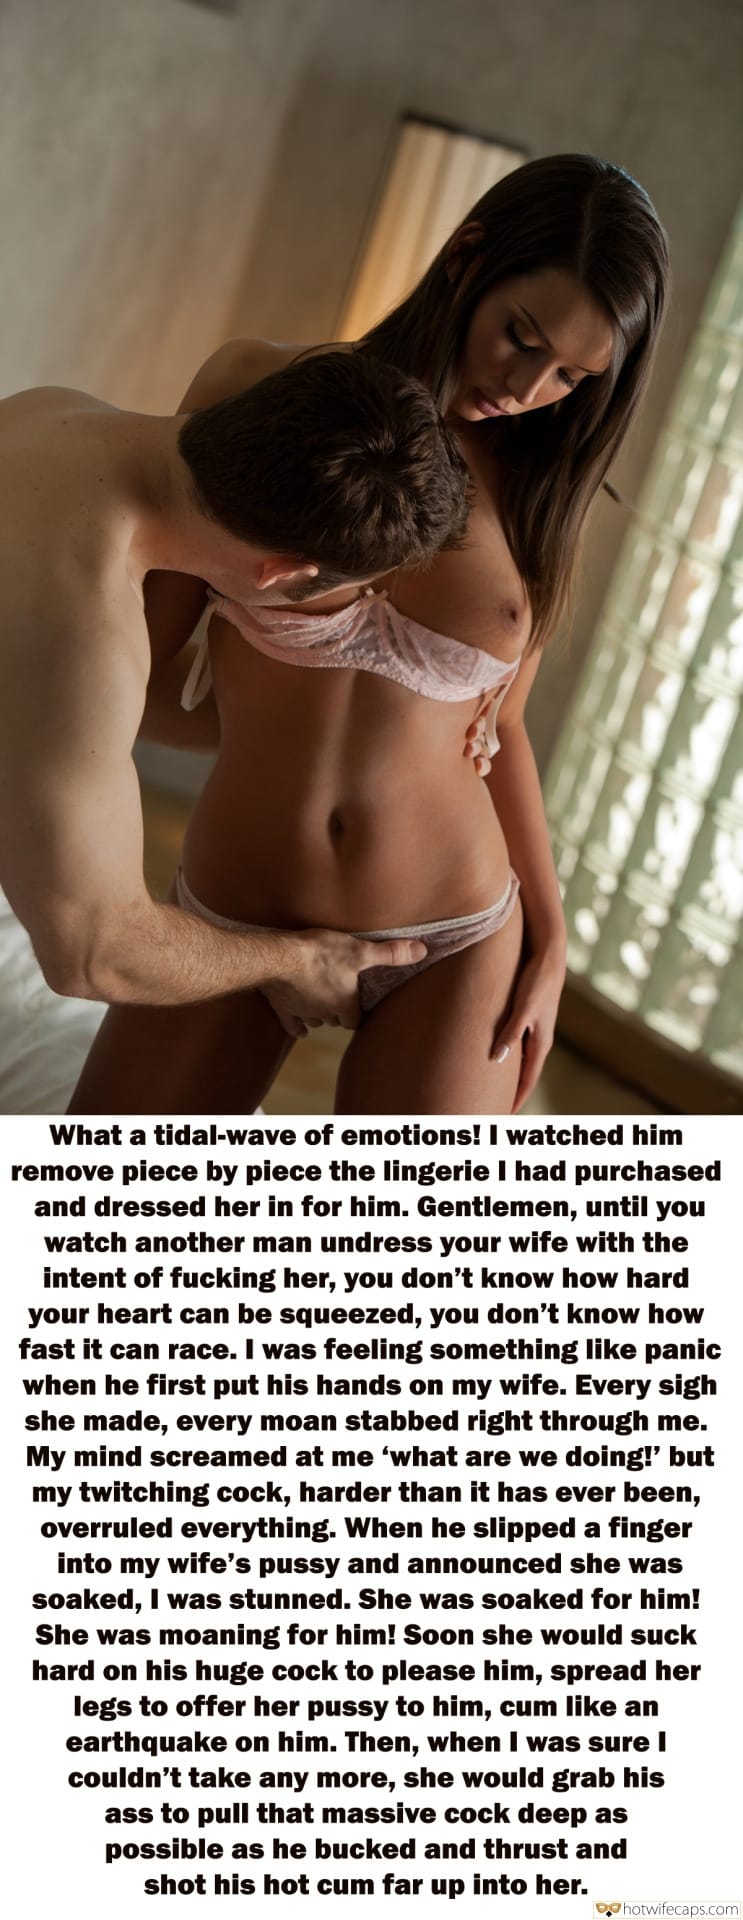 Wife Sharing hotwife caption: What a tidal-wave of emotions! I watched him remove piece by piece the lingerie I had purchased and dressed her in for him. Gentlemen, until you watch another man undress your wife with the intent of fucking her, you don’t...